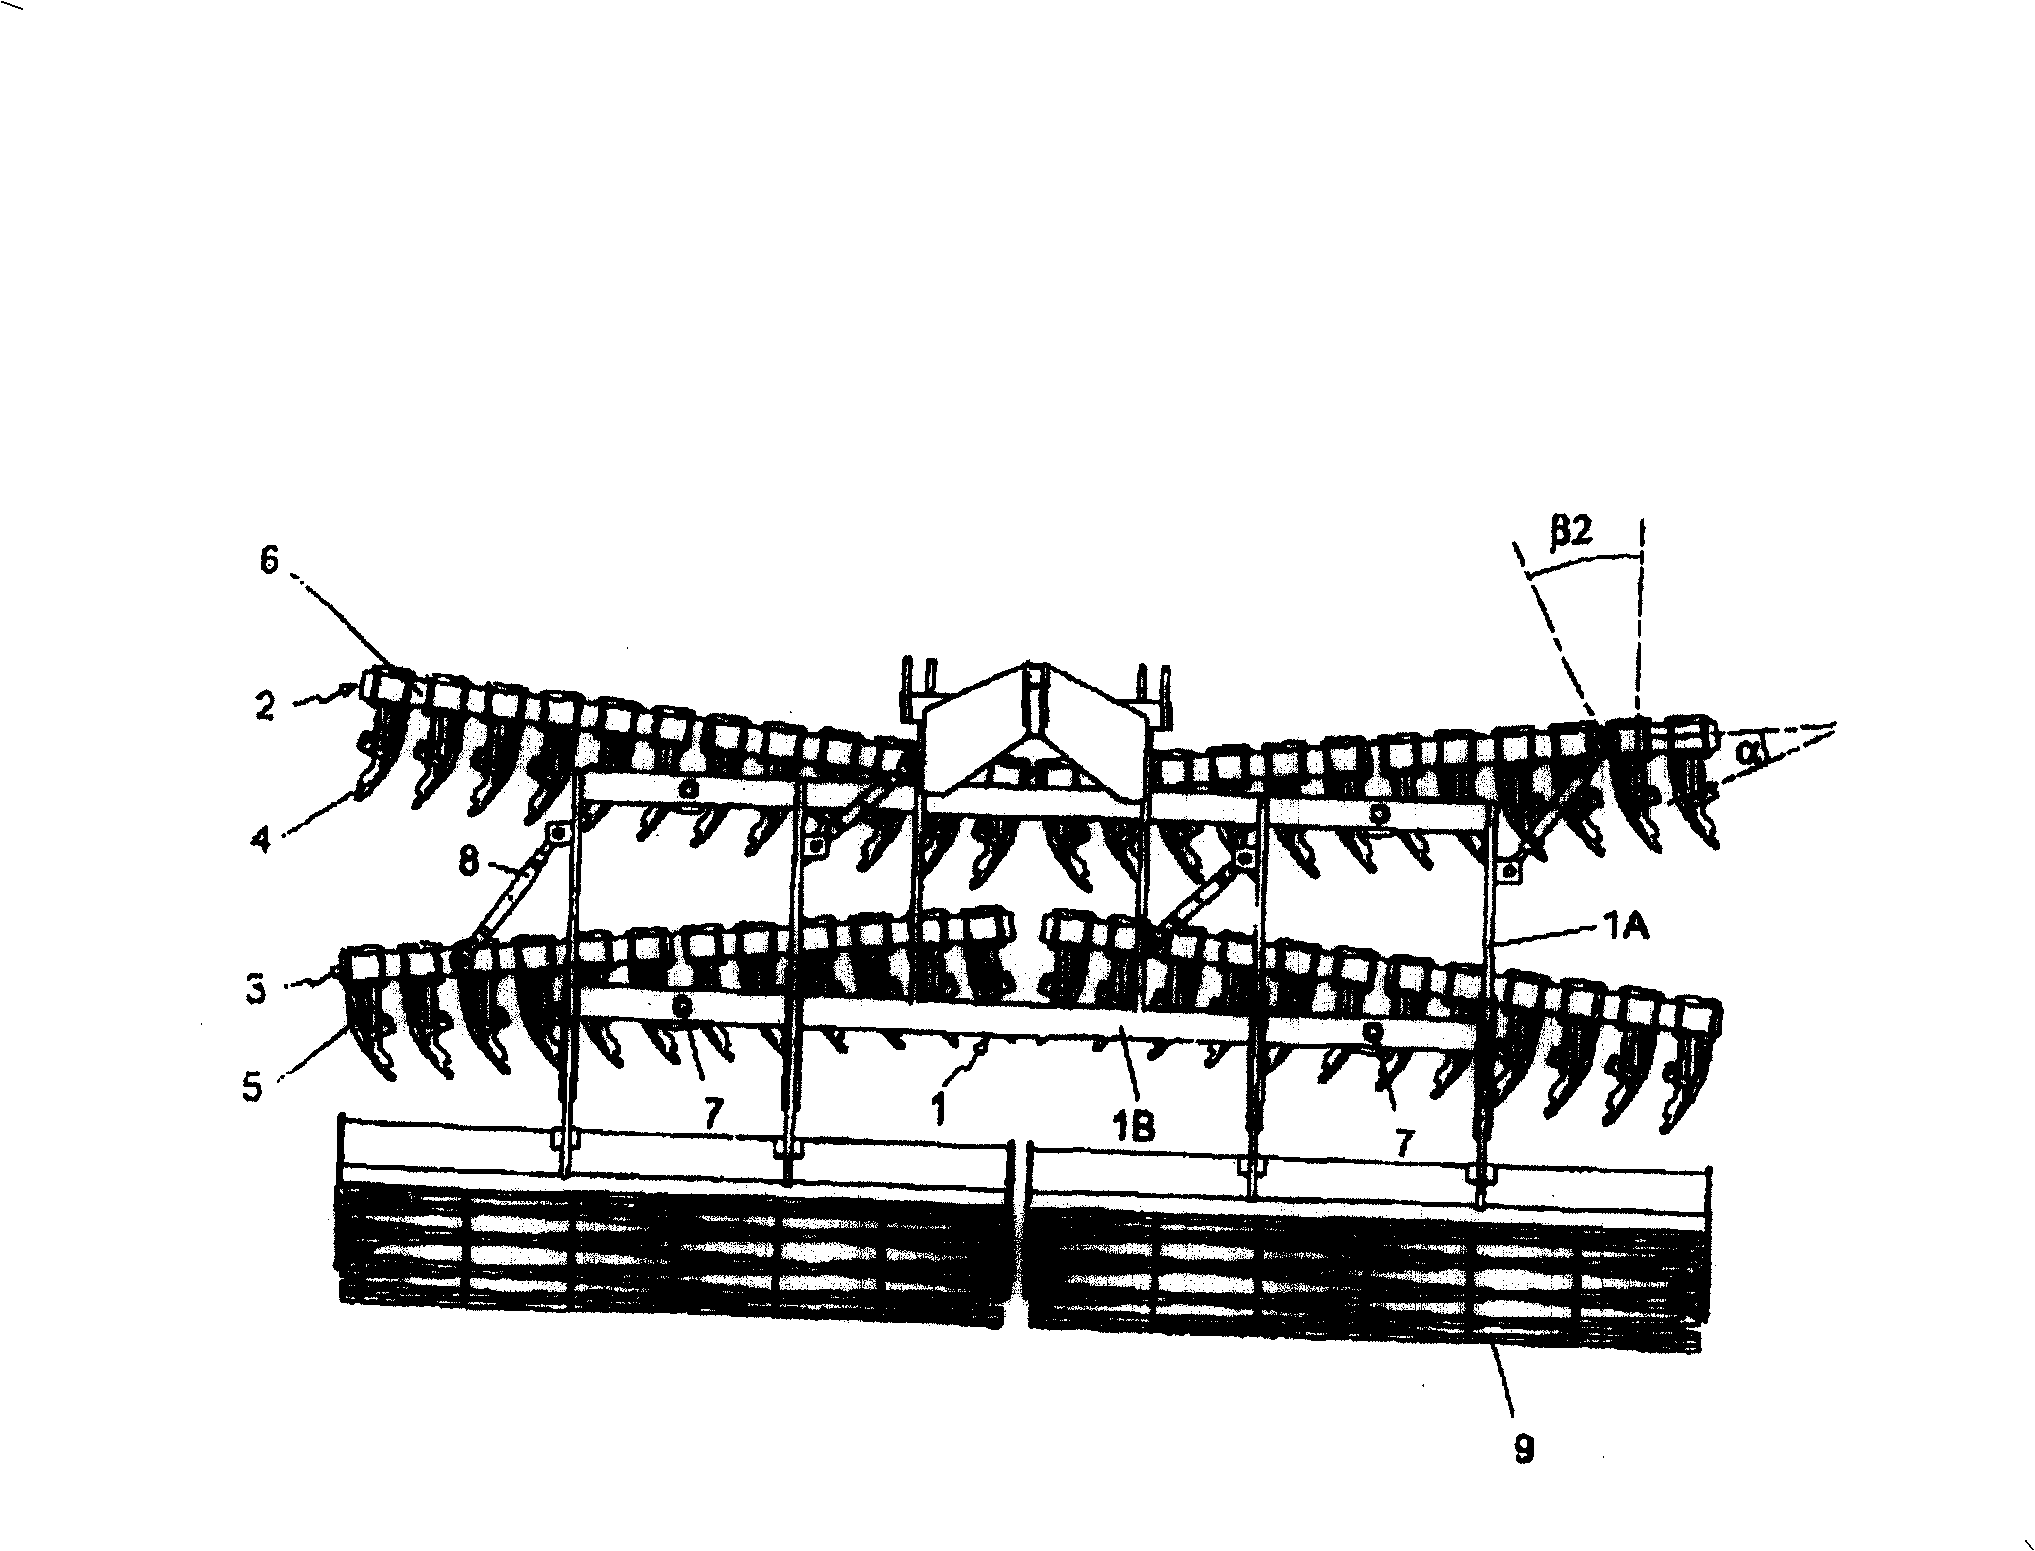 Stubble-plow type tilling machine for plowing ground